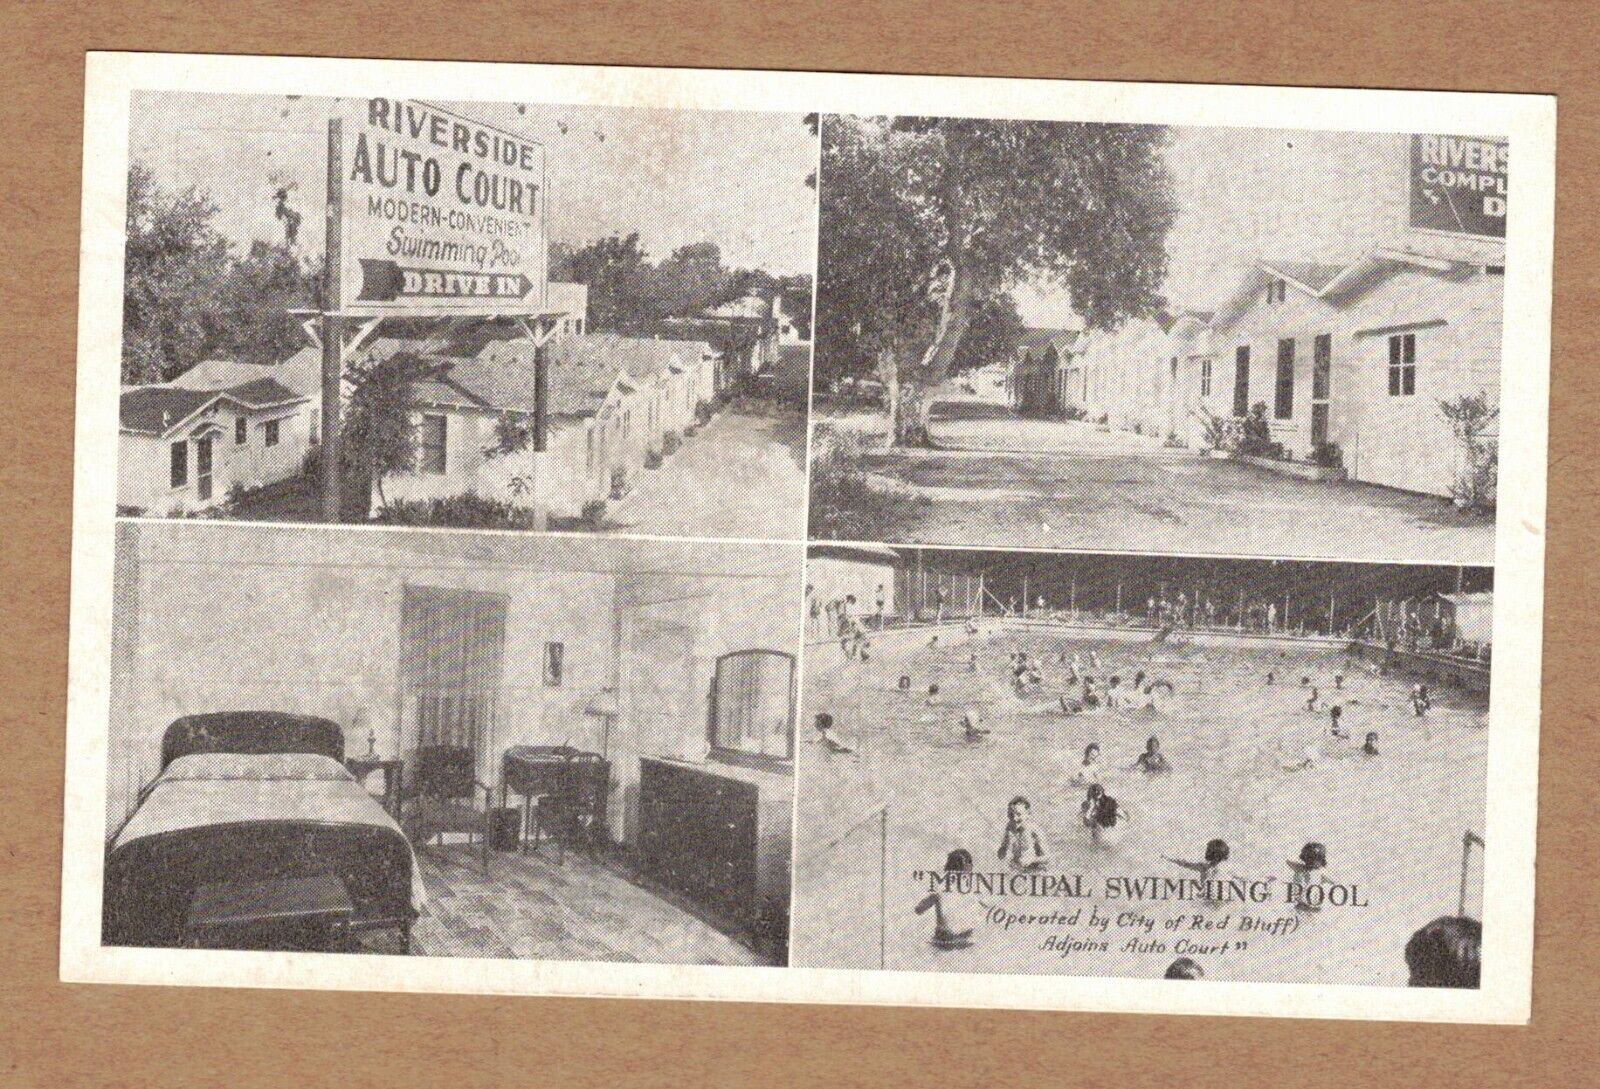 Vintage Riverside Auto Court, Municipal Swimming Pool Postcard, Red Bluff Cal.